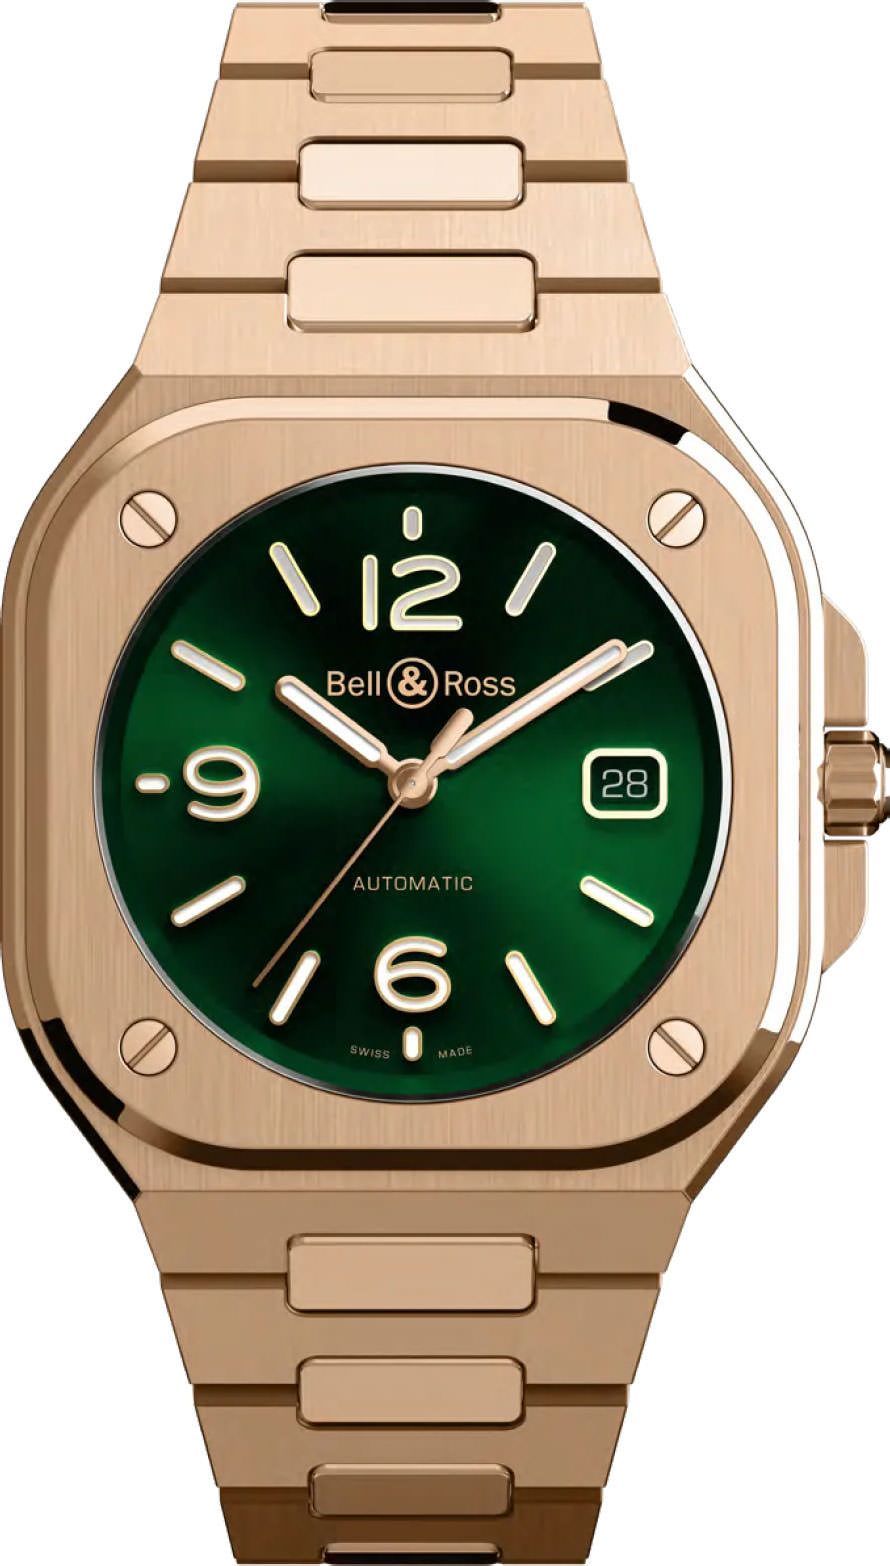 Bell & Ross Urban BR 05 Auto Green Dial 40 mm Automatic Watch For Men - 1